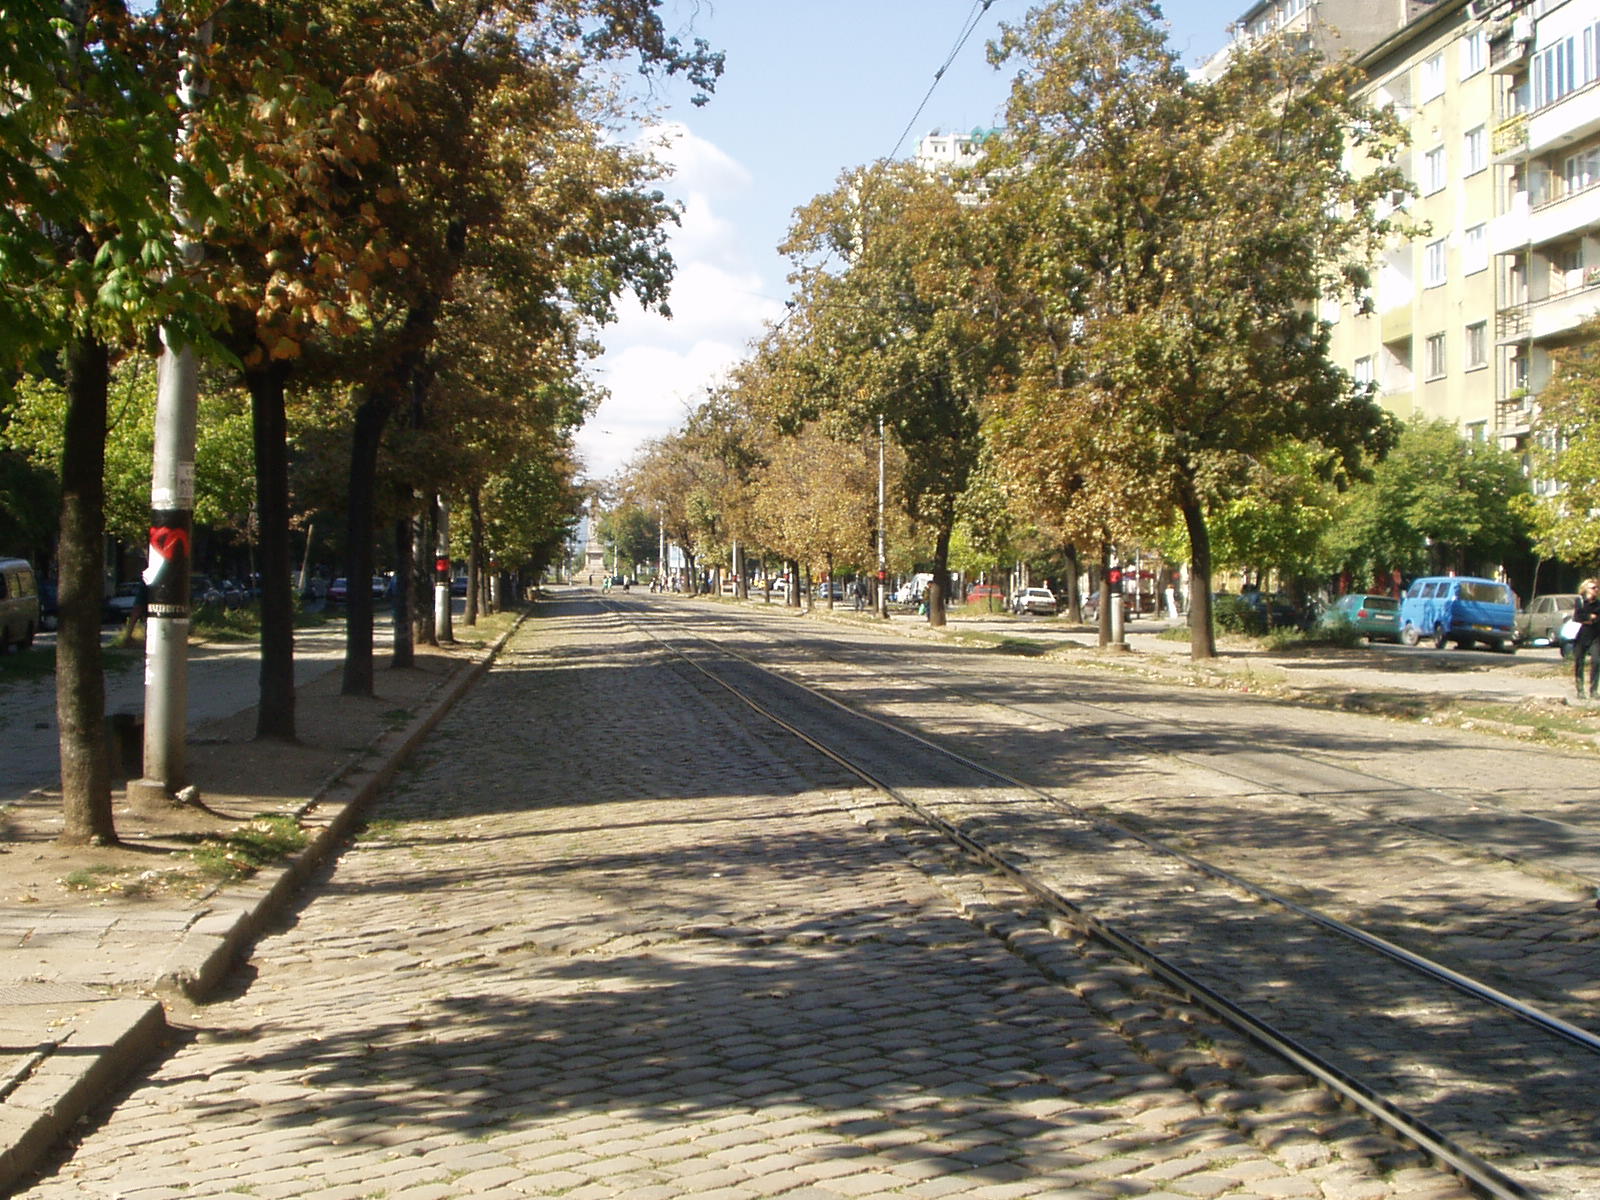 A cobbled street for trams